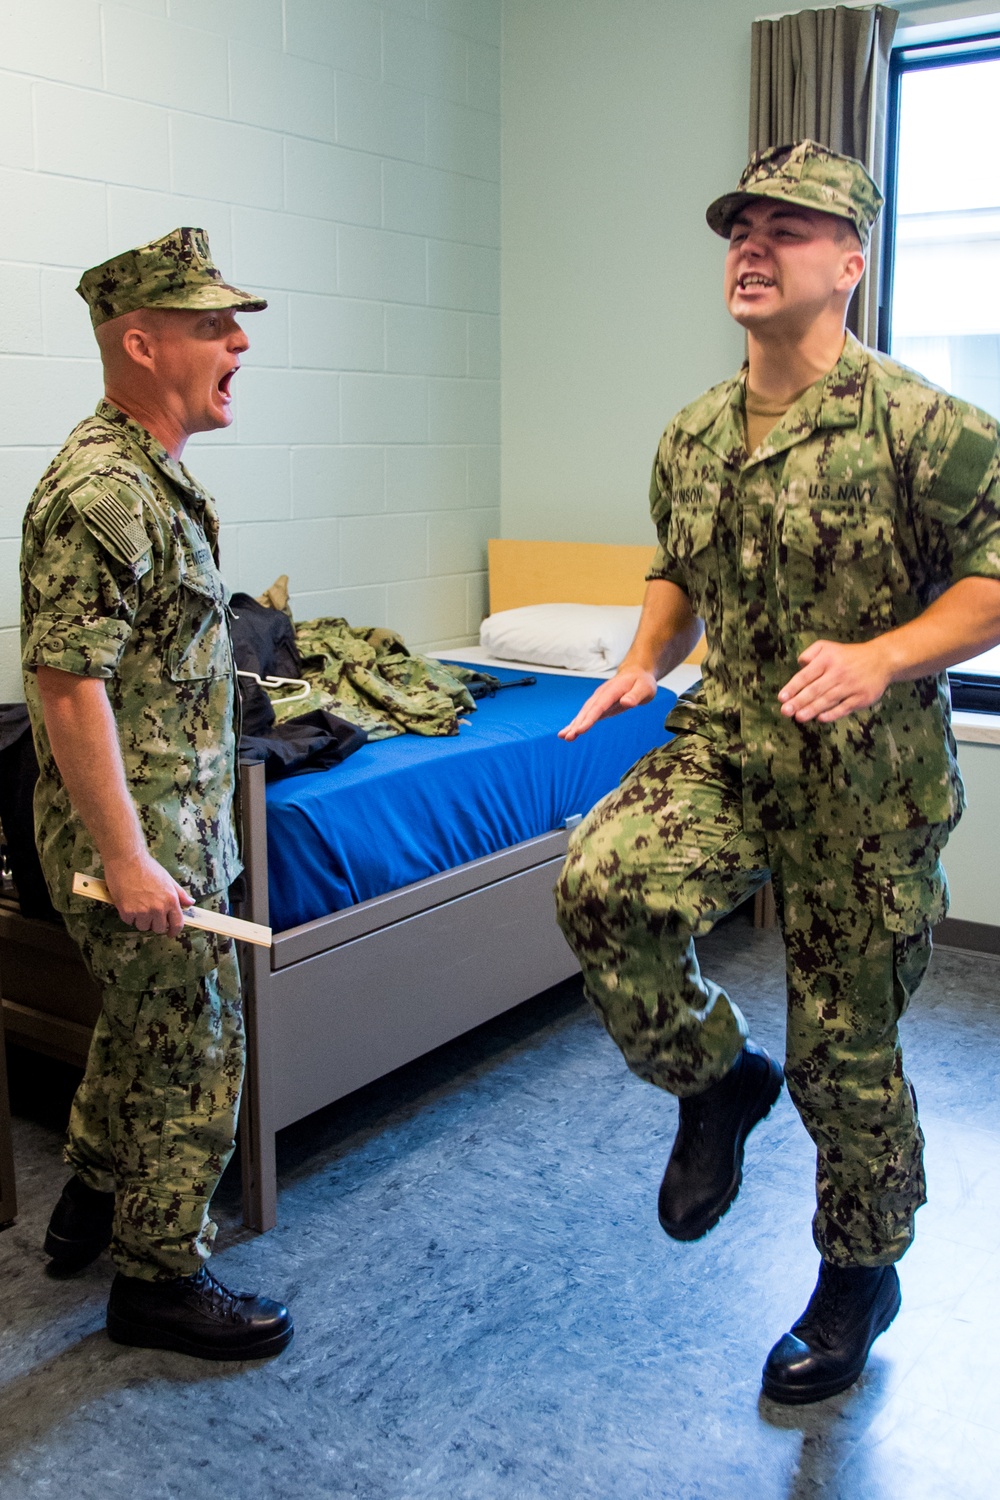 Recruit Division Commanders (RDC) here at Officer Training Command in Newport, Rhode Island (OTCN) conduct room inspections as part of the Room, Locker and Personnel (RLP) inspection for Officer Candidate School (OCS) class 02-20 on Sept. 5, 2019.